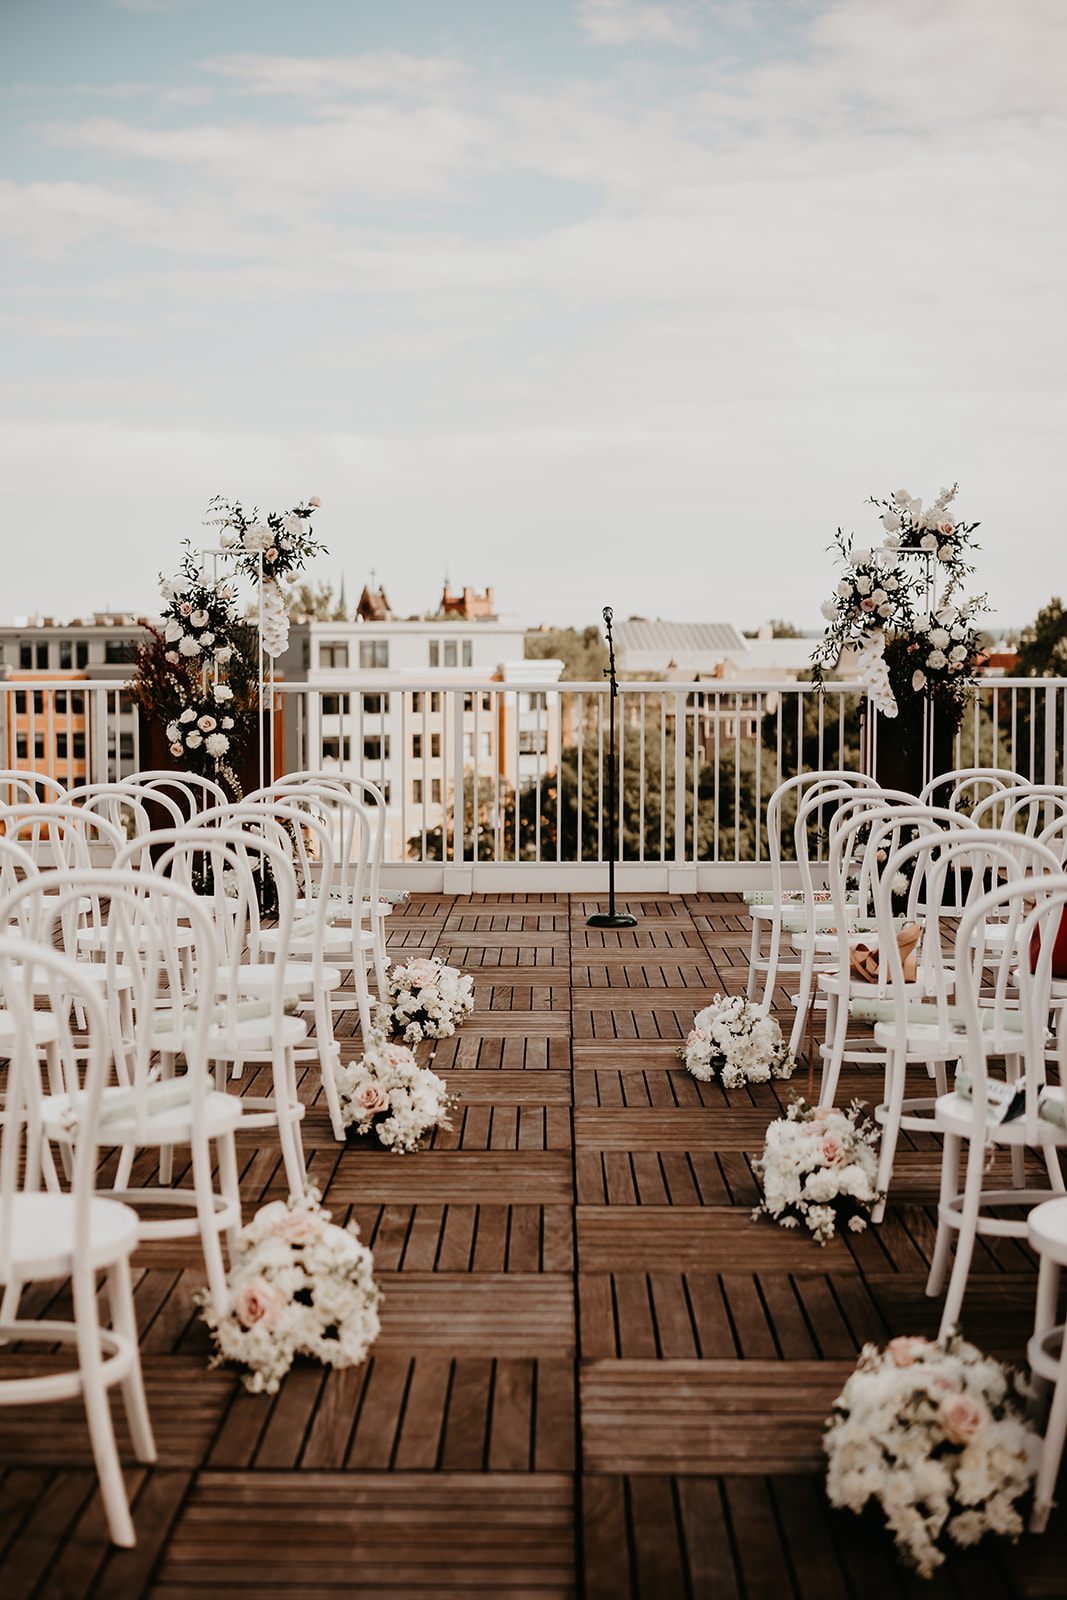 Beautifully decorated rooftop venue at The Lantern Room in Cleveland, Ohio - setting the stage for an unforgettable wedd